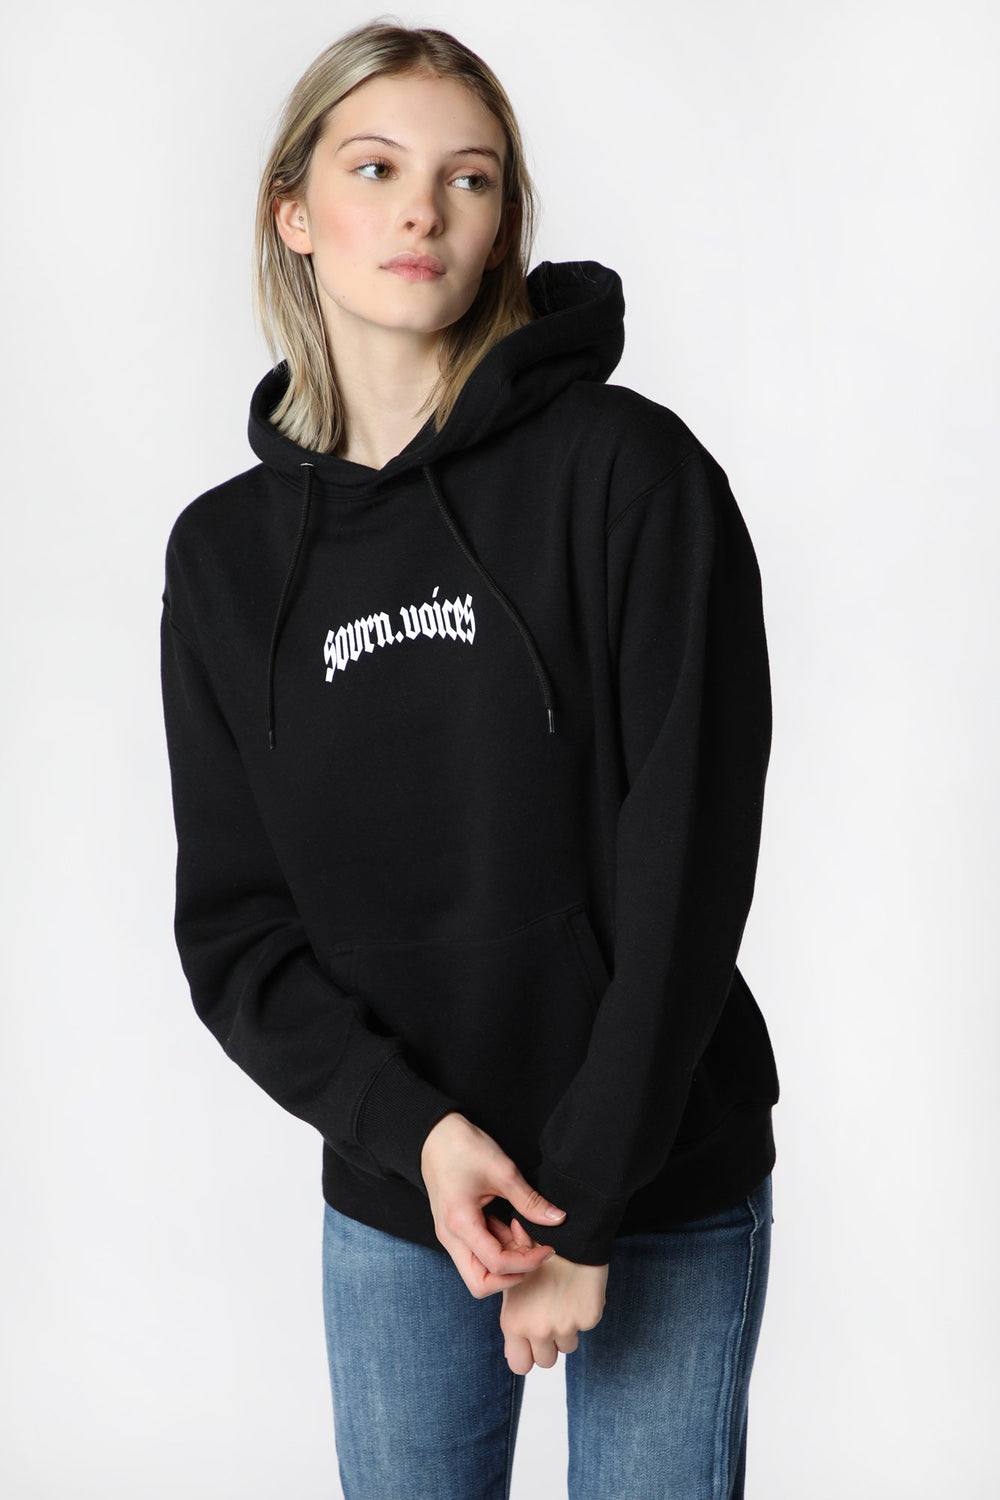 Womens Sovrn Voices Brokehearted Graphic Hoodie Womens Sovrn Voices Brokehearted Graphic Hoodie